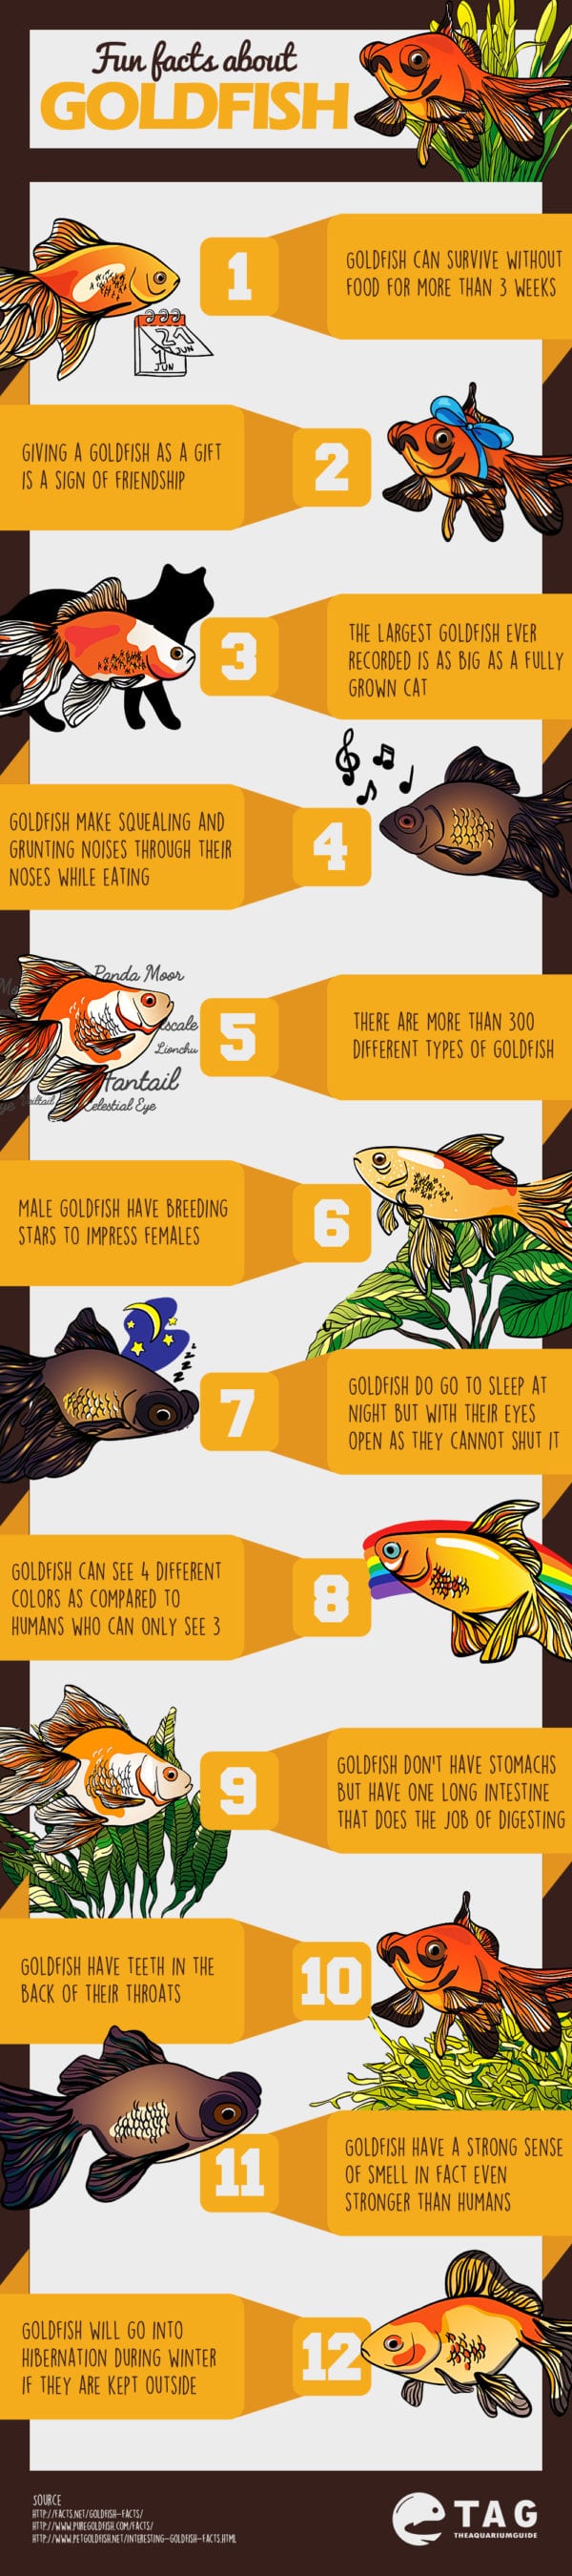 Fun Facts About Goldfish